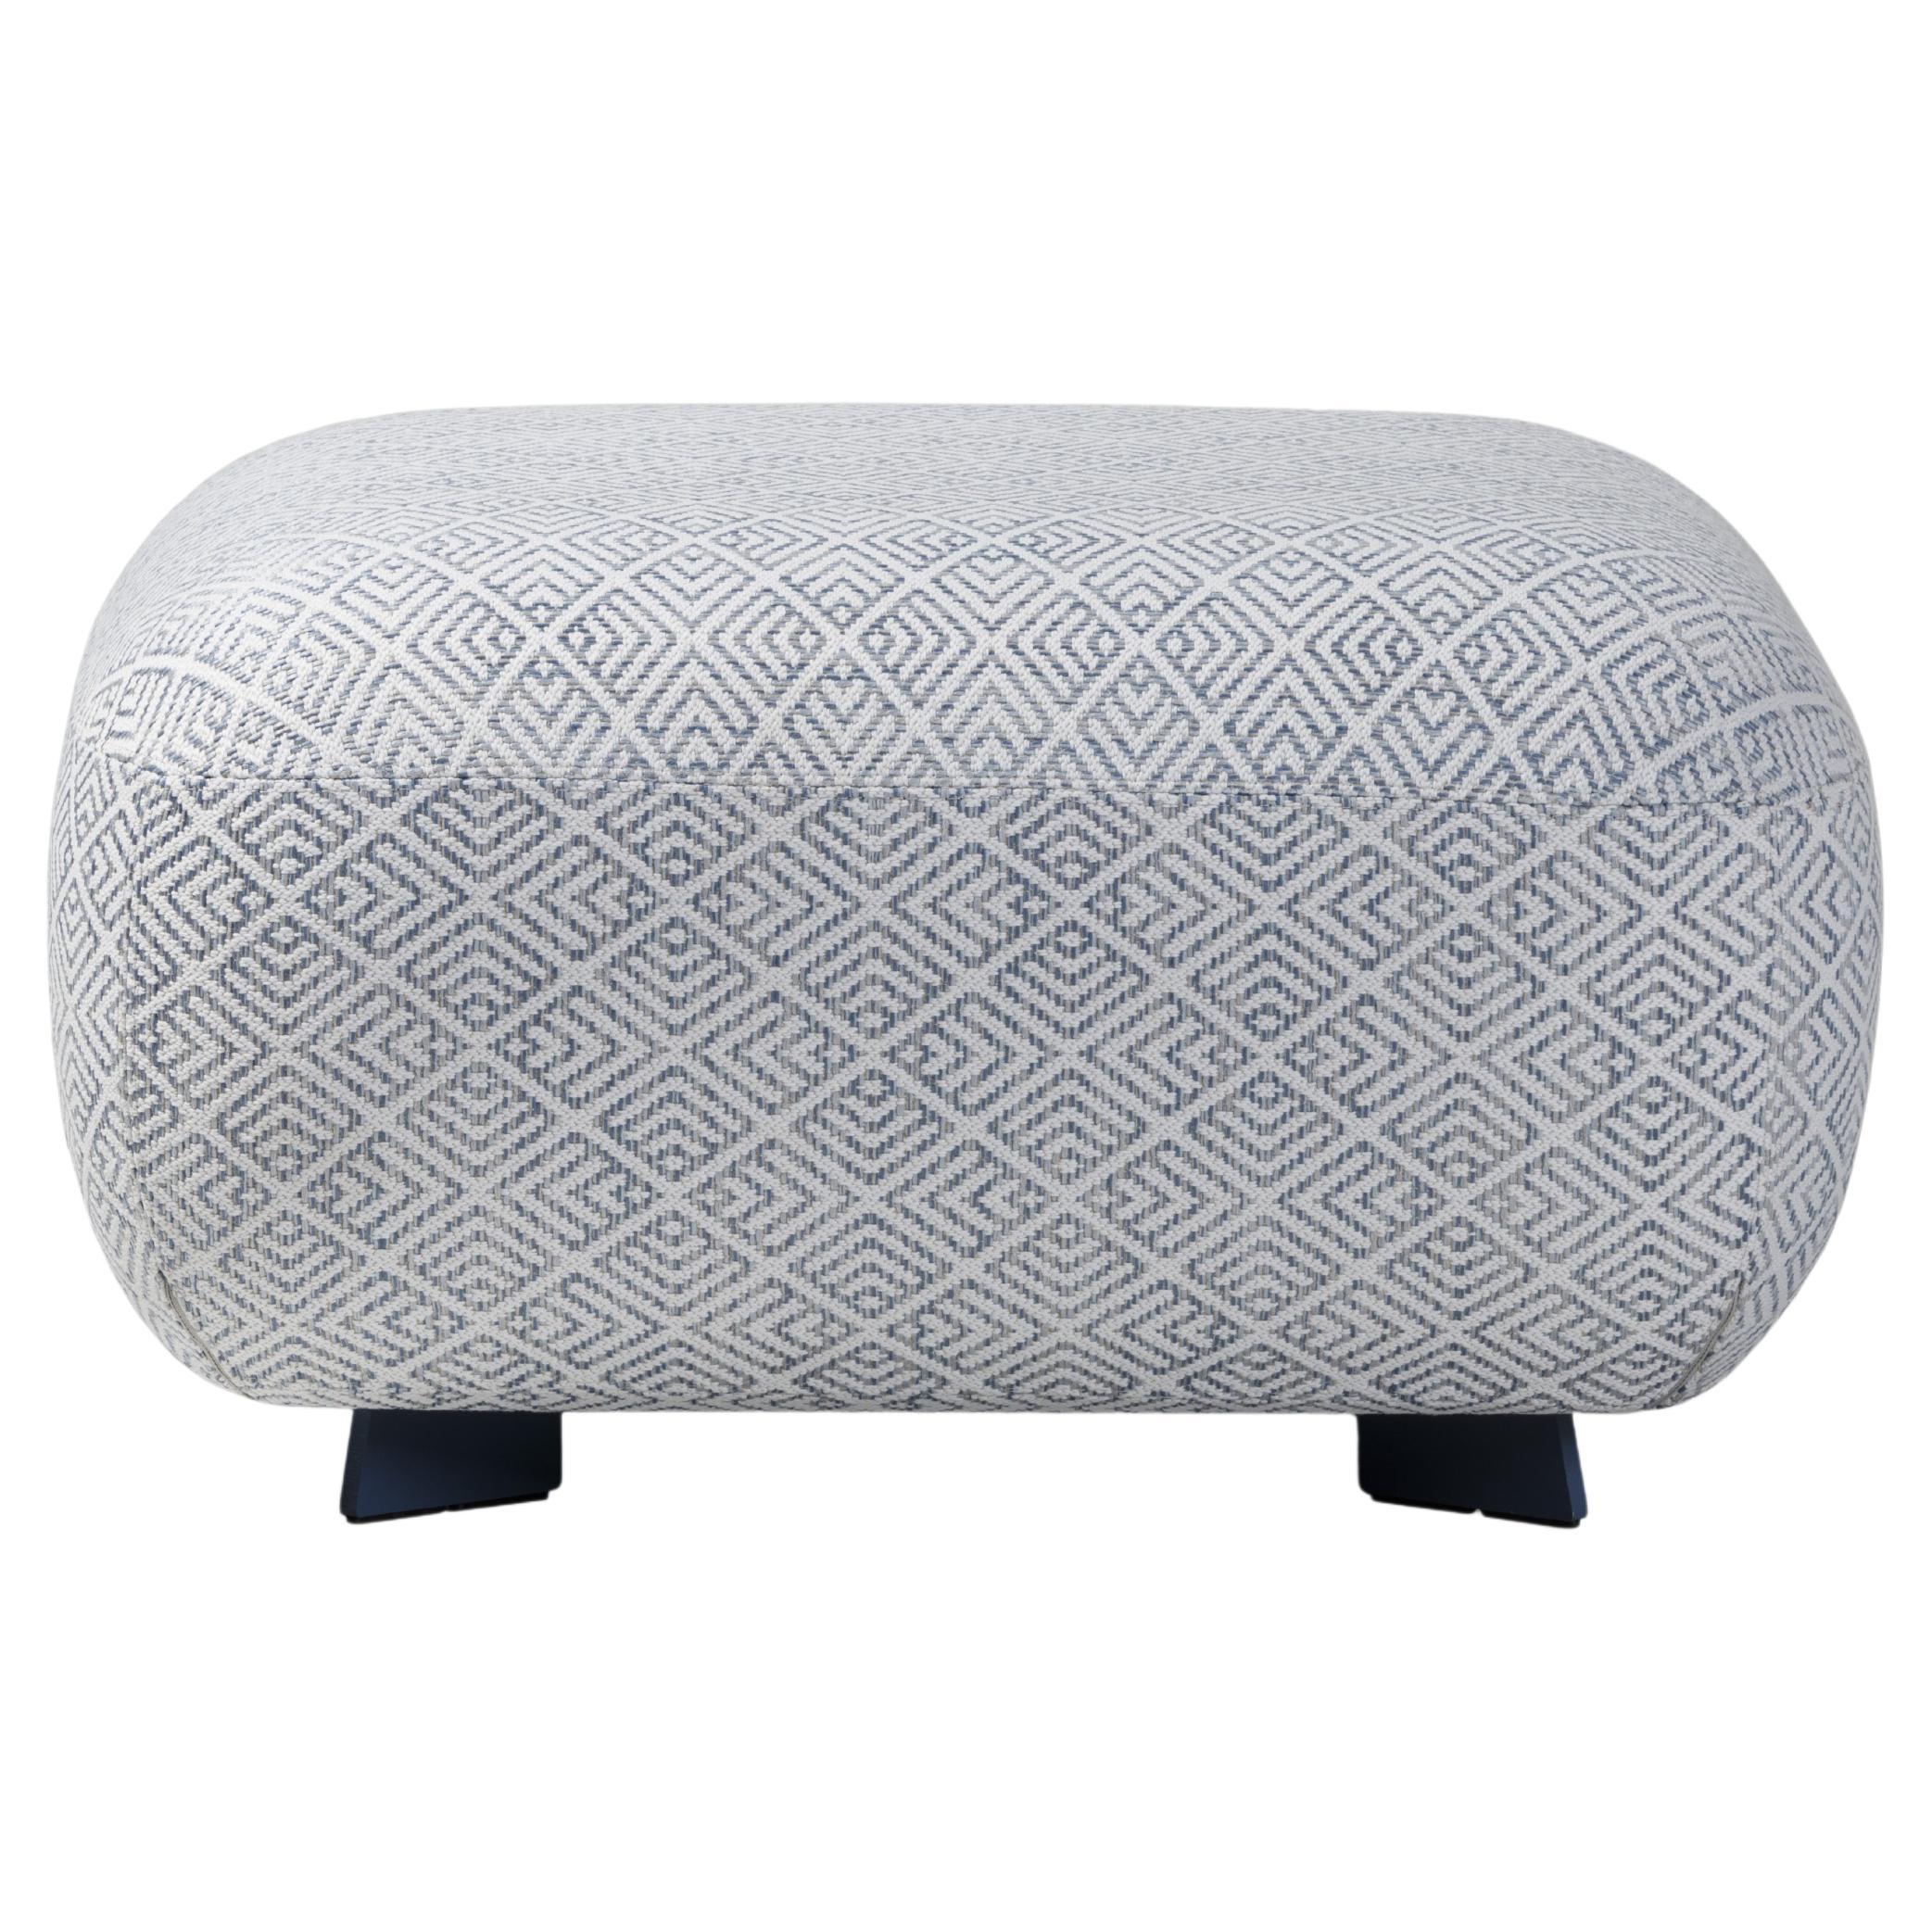 21st Century Modern Big Square Pouf for Outdoor Code Made in Italy For Sale